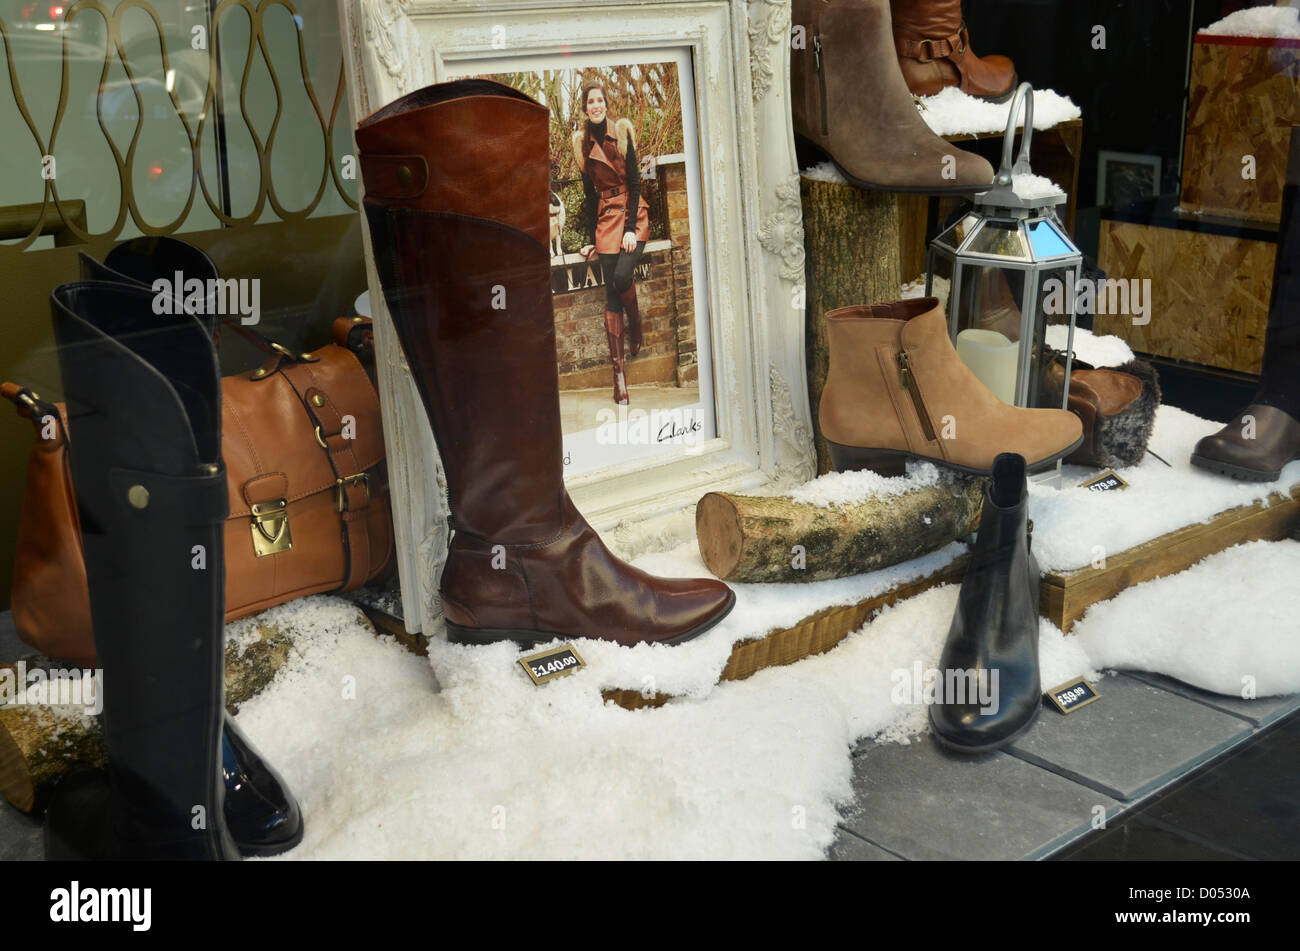 Clarks shoe store window display showing winter range of boots and shoes  Stock Photo - Alamy